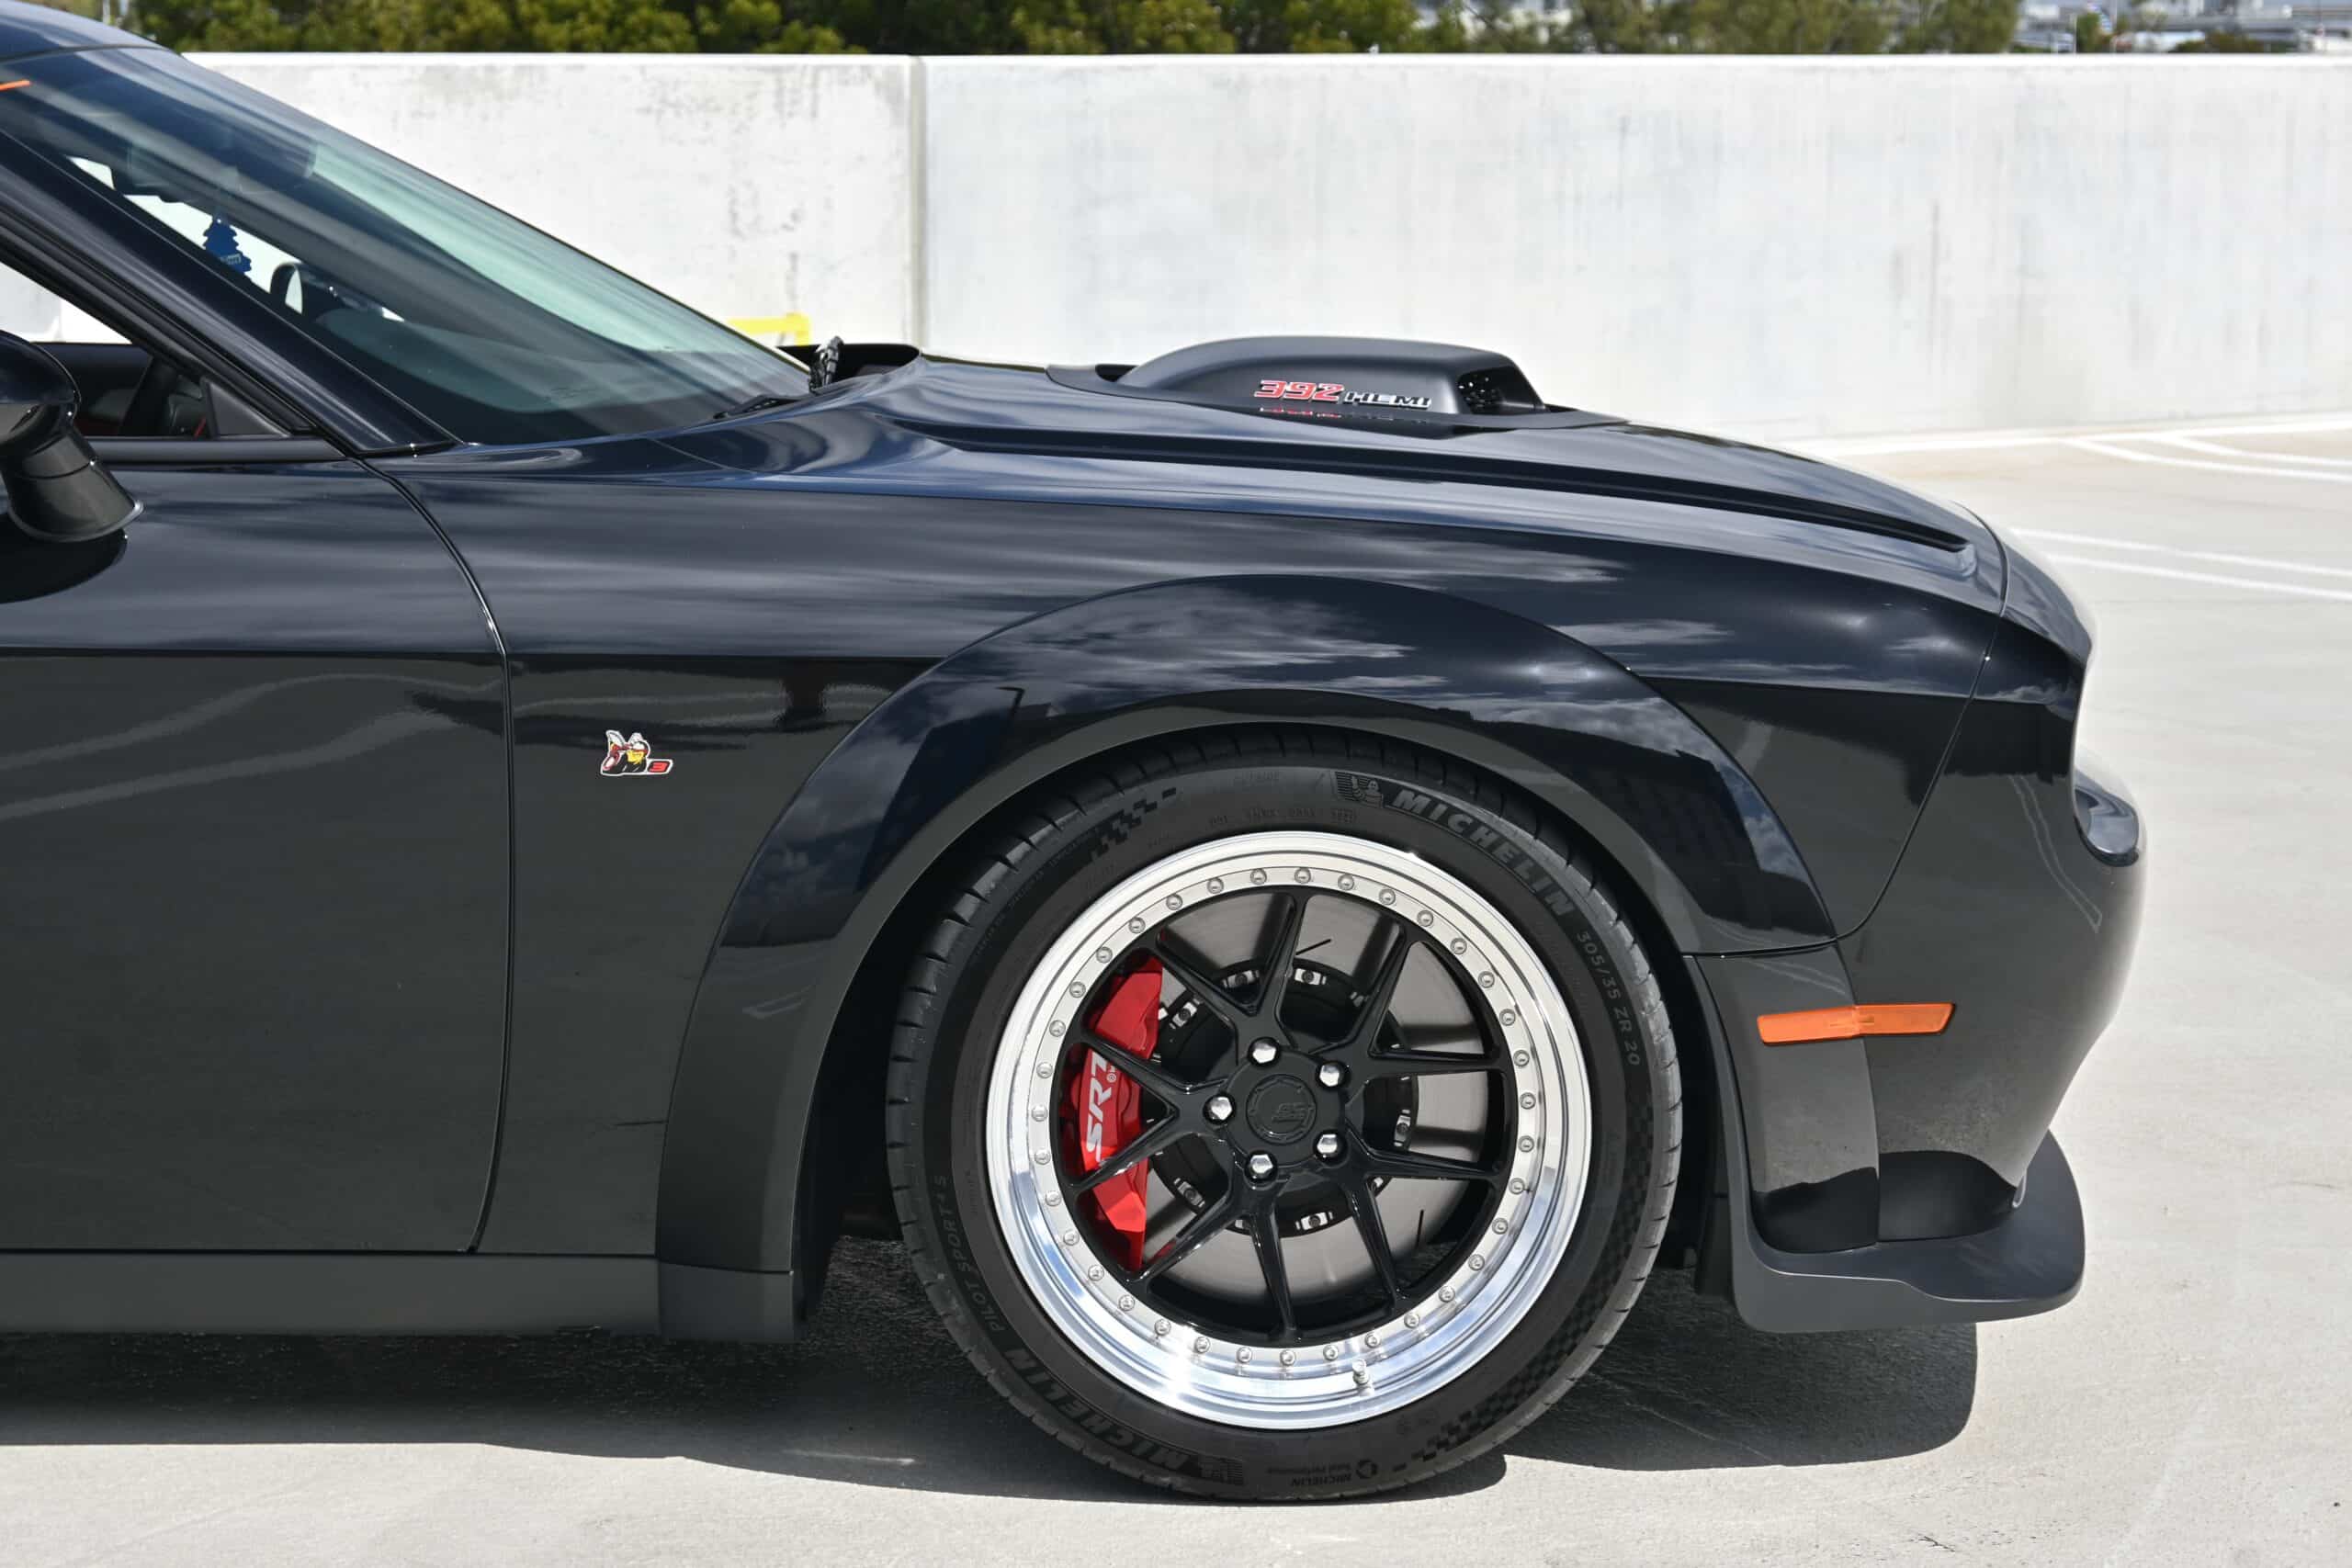 2021 Dodge Challenger R/T 392 Widebody SHOW CAR / Rare 6 Speed Manual / $20,000 in mods / Makes 627 Wheel Horsepower